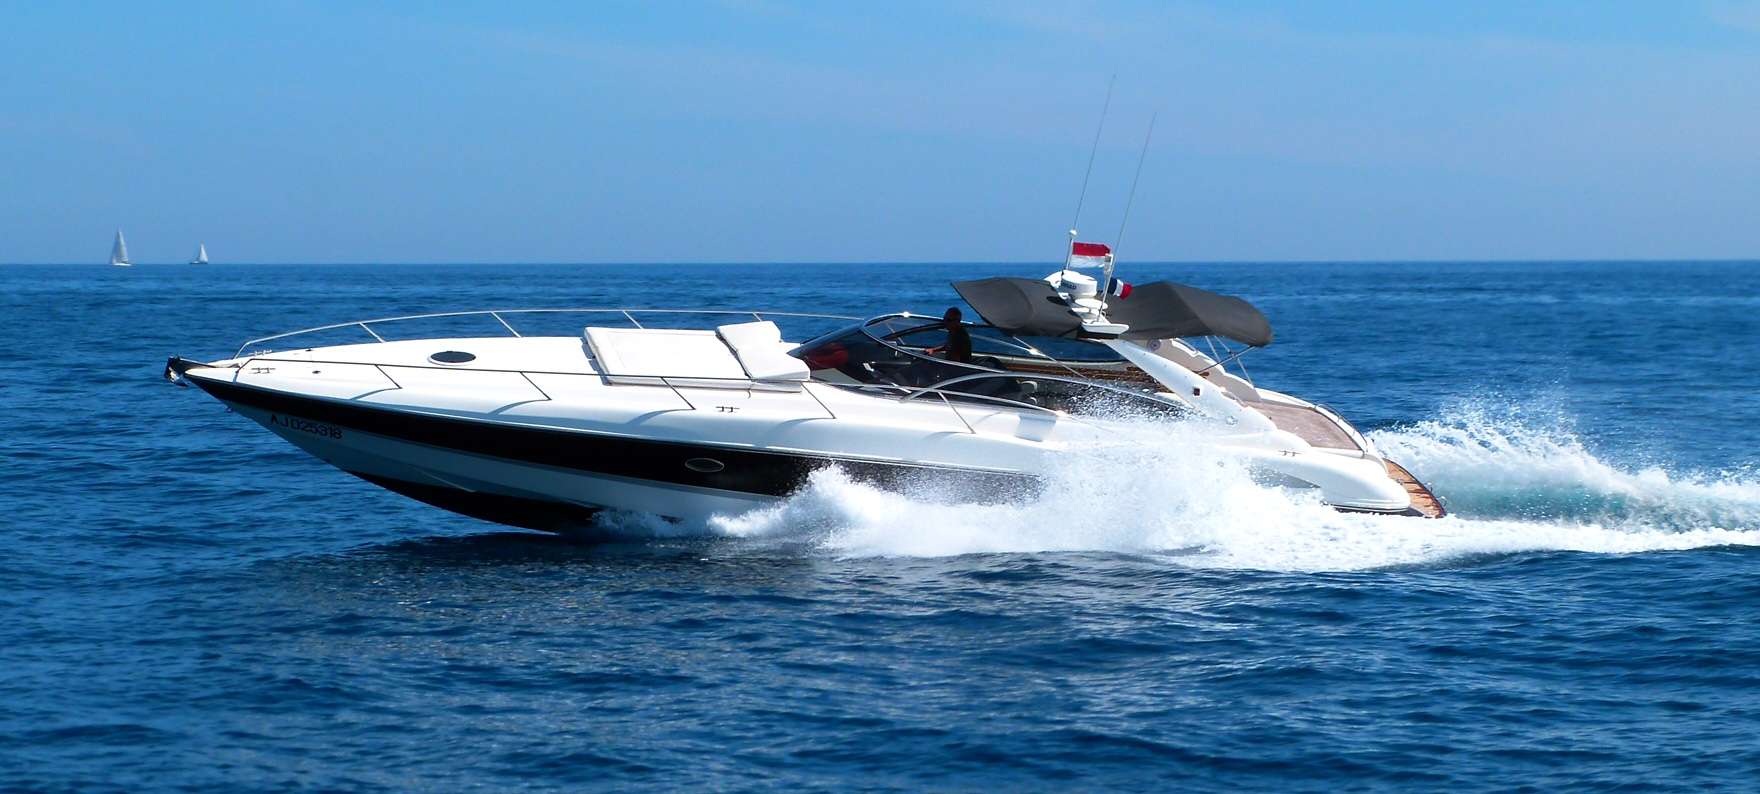 Sunseeker 48 - Motor Boat Charter France & Boat hire in France French Riviera Cannes Vieux port de Vallauris 2